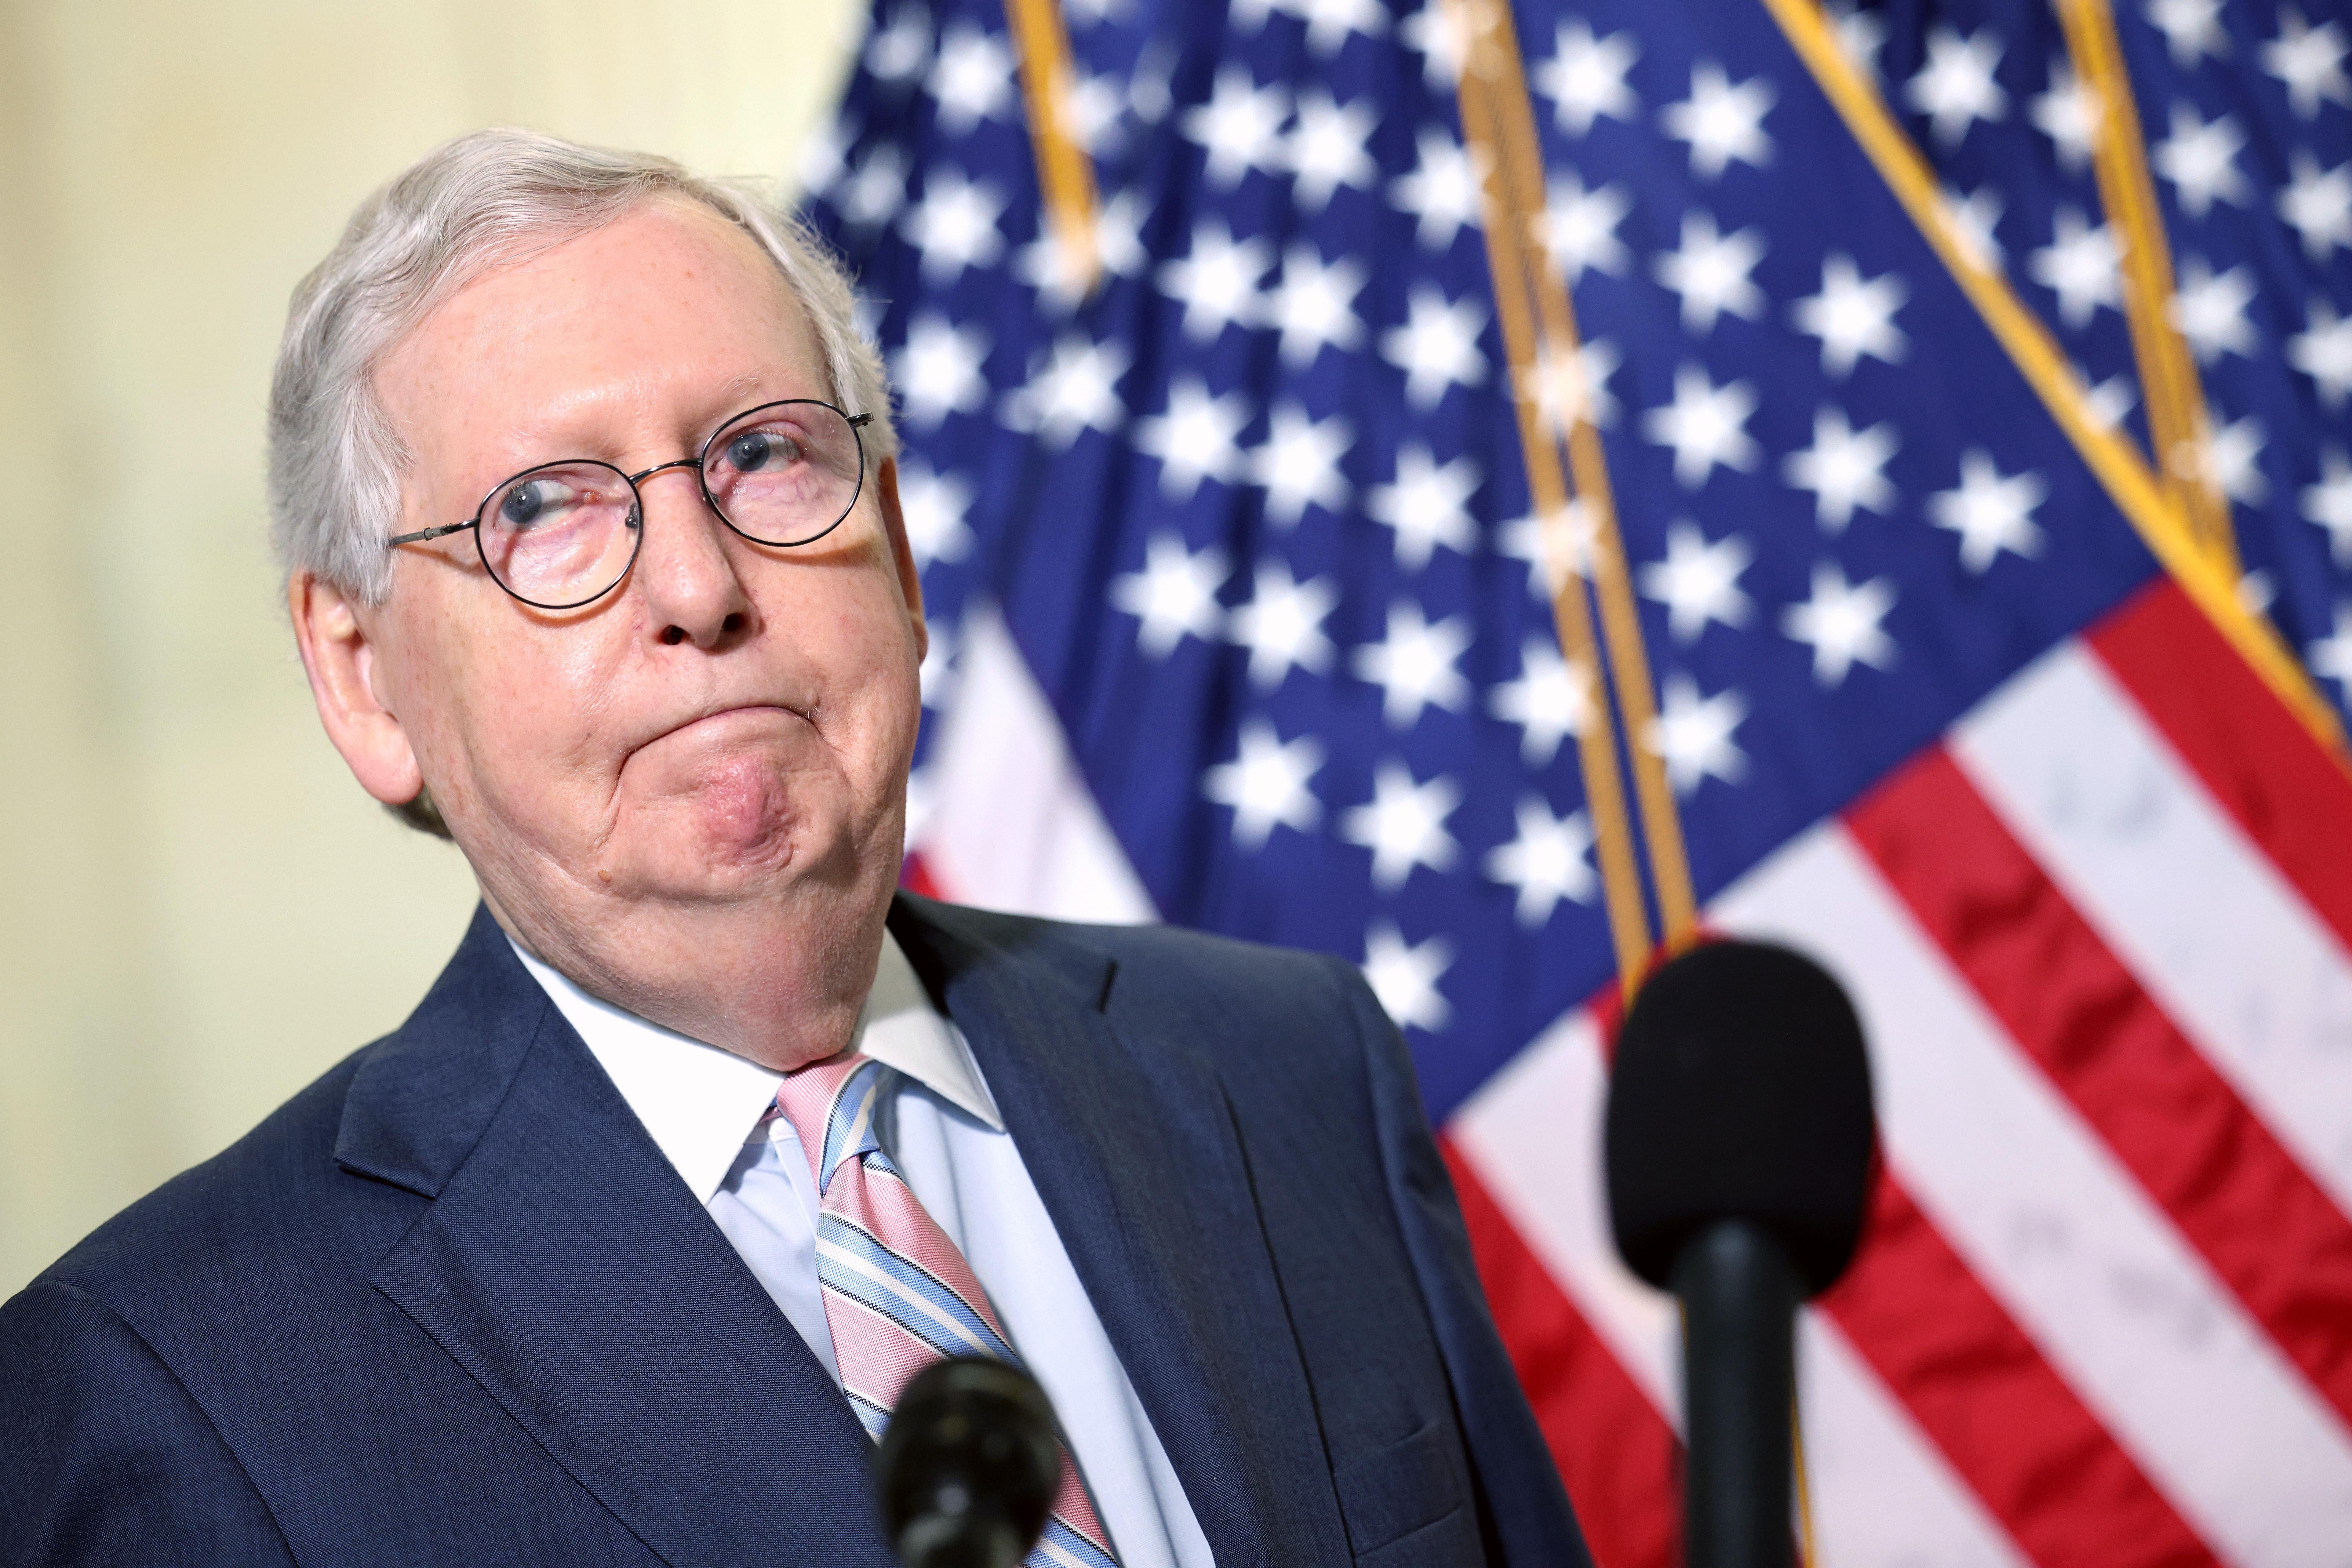 Mitch McConnell stands behind a mic and in front of a U.S. flag.